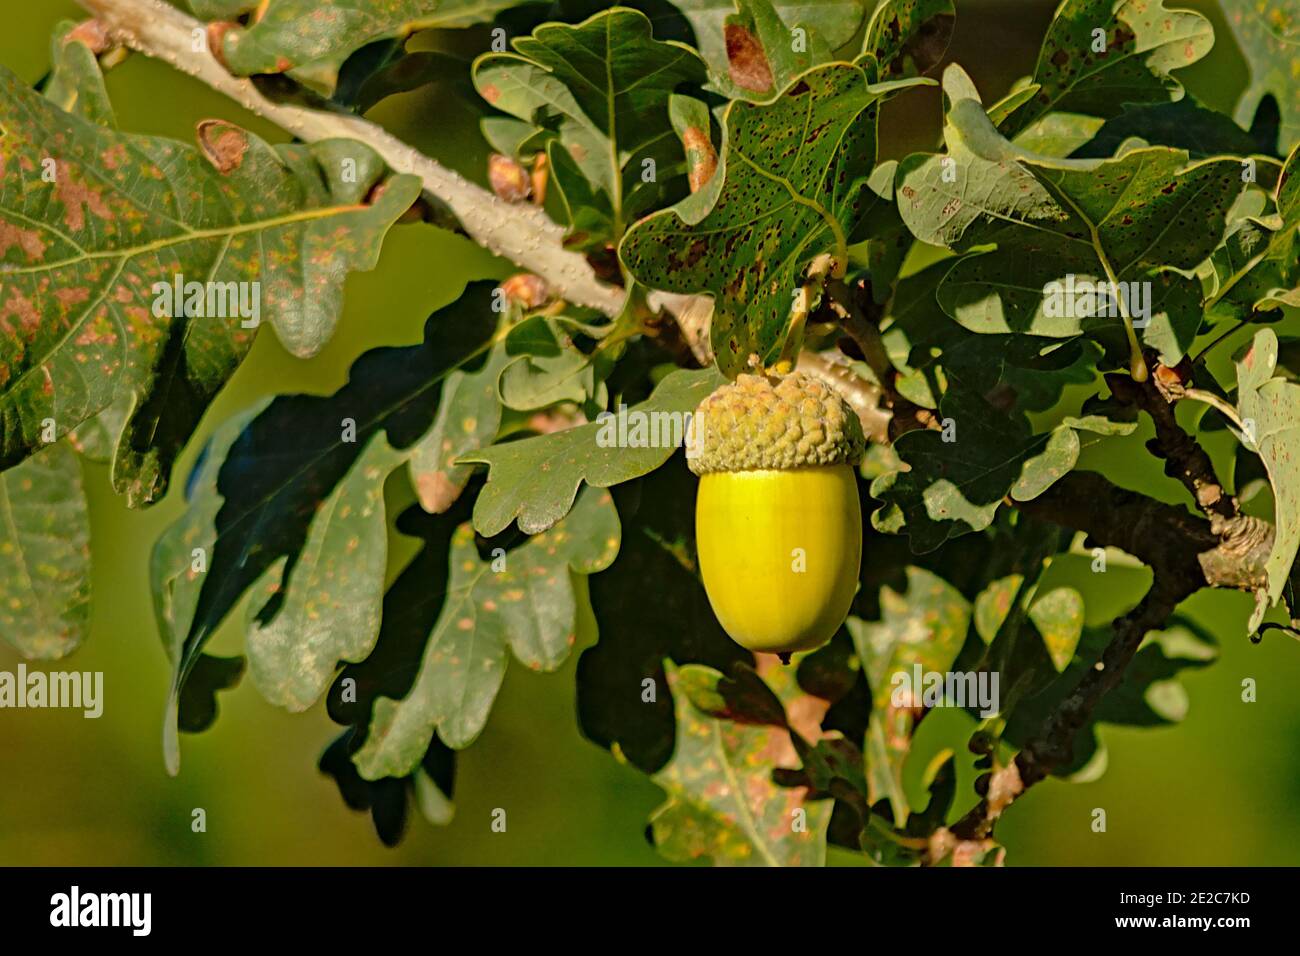 Green acorn nut and leafs on the branch of a tree, selective focus Stock Photo